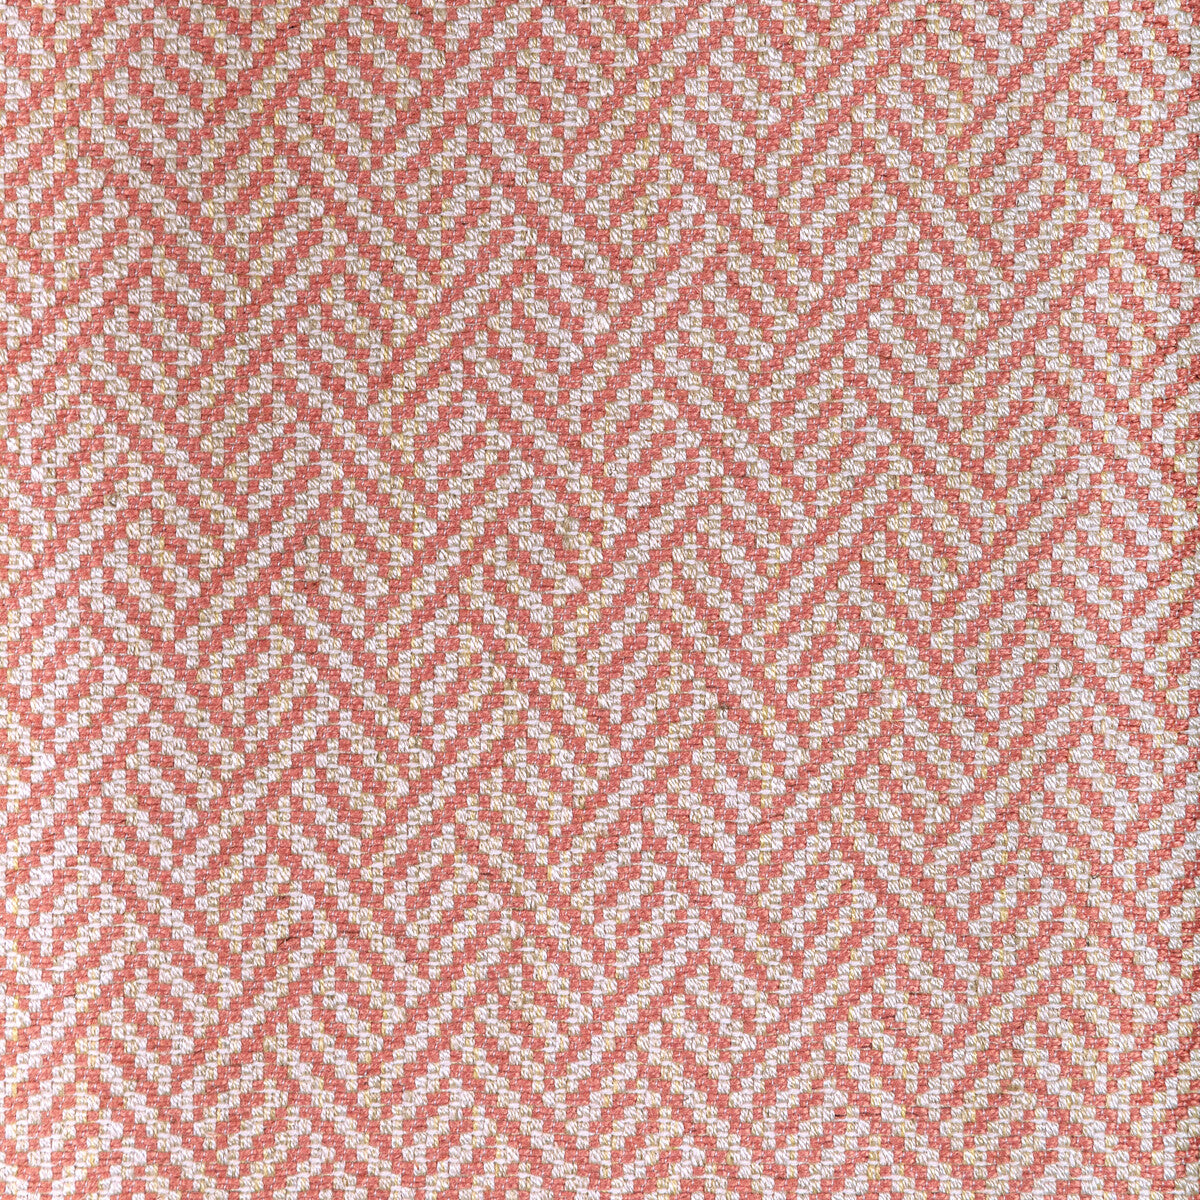 Colbert Weave fabric in petal color - pattern 8022108.7.0 - by Brunschwig &amp; Fils in the Lorient Weaves collection